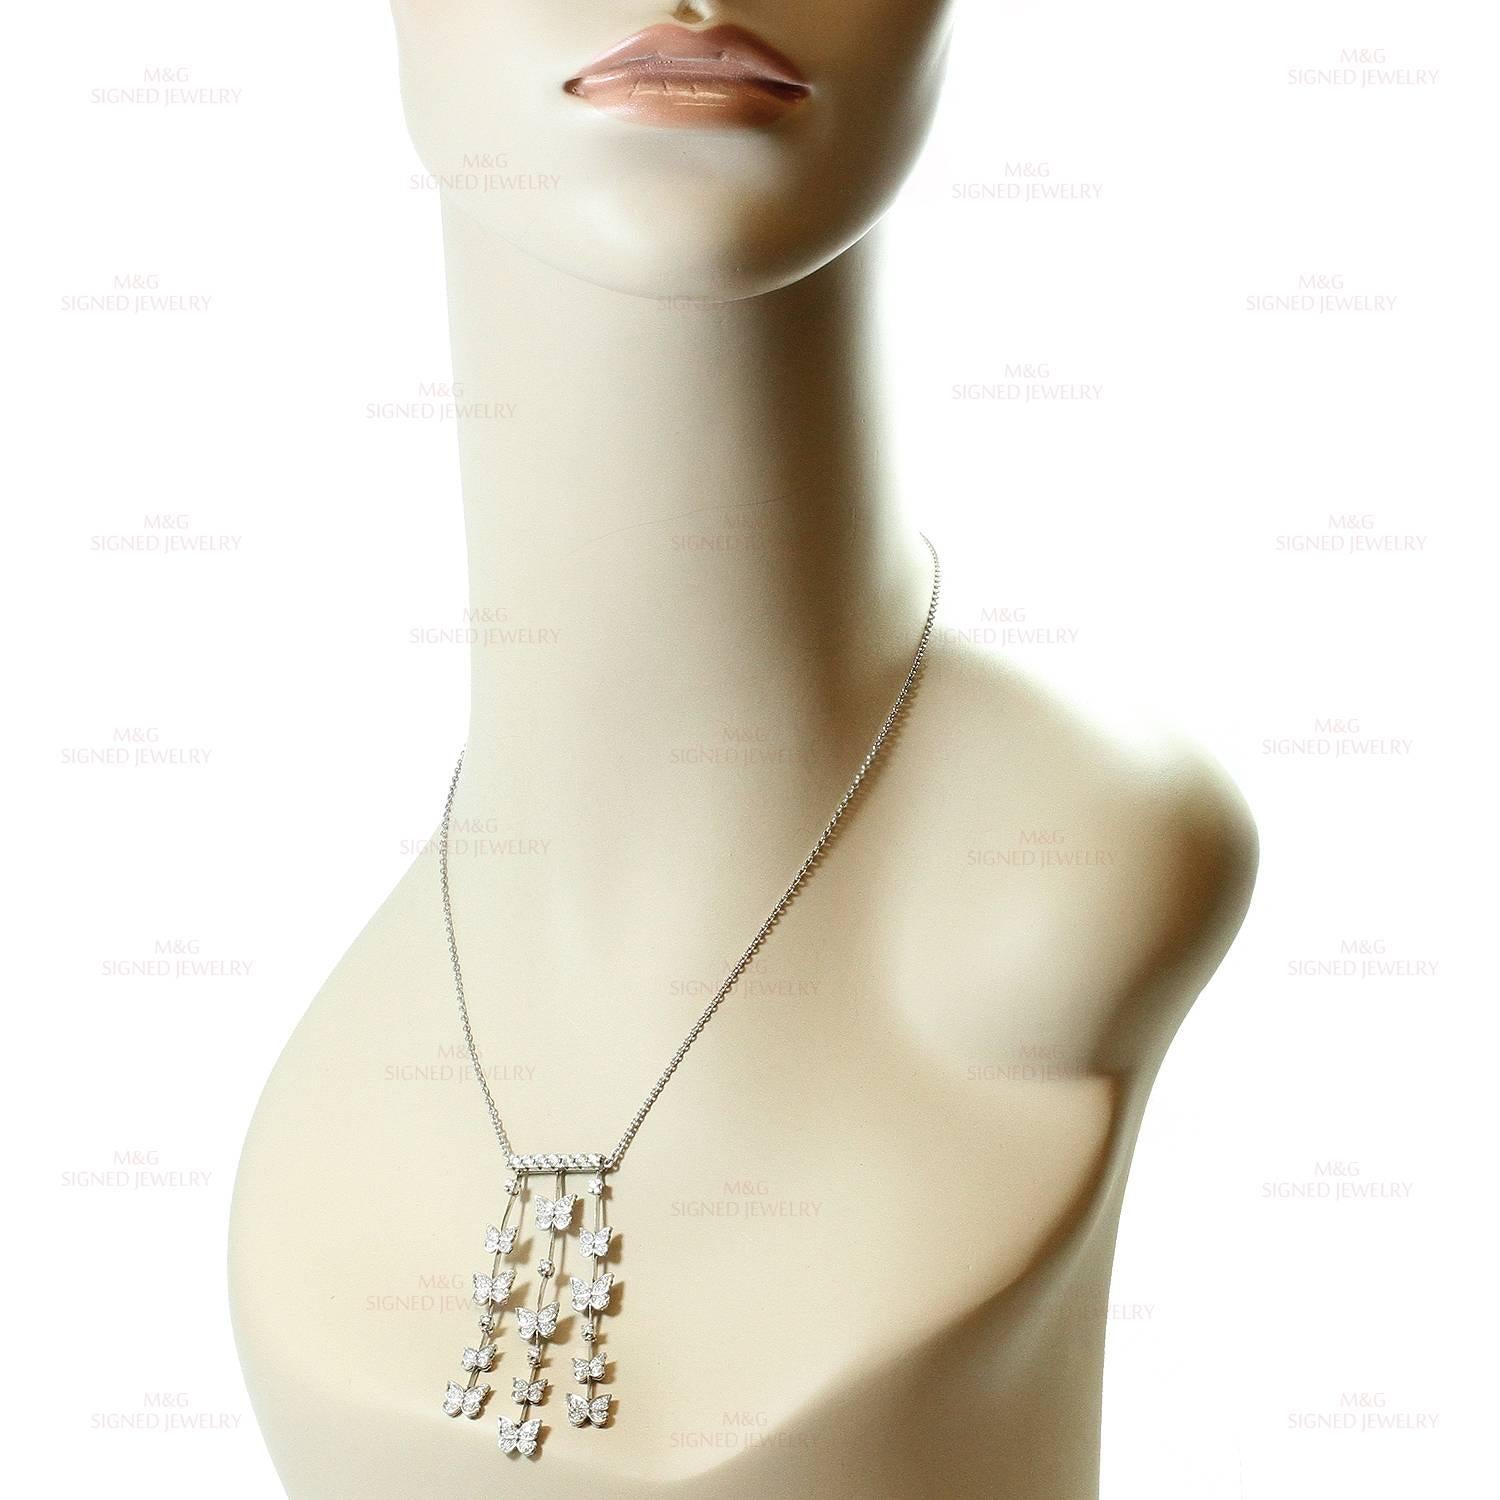 Carrera y Carrera Butterflies Diamond White Gold Earrings and Necklace Set 1